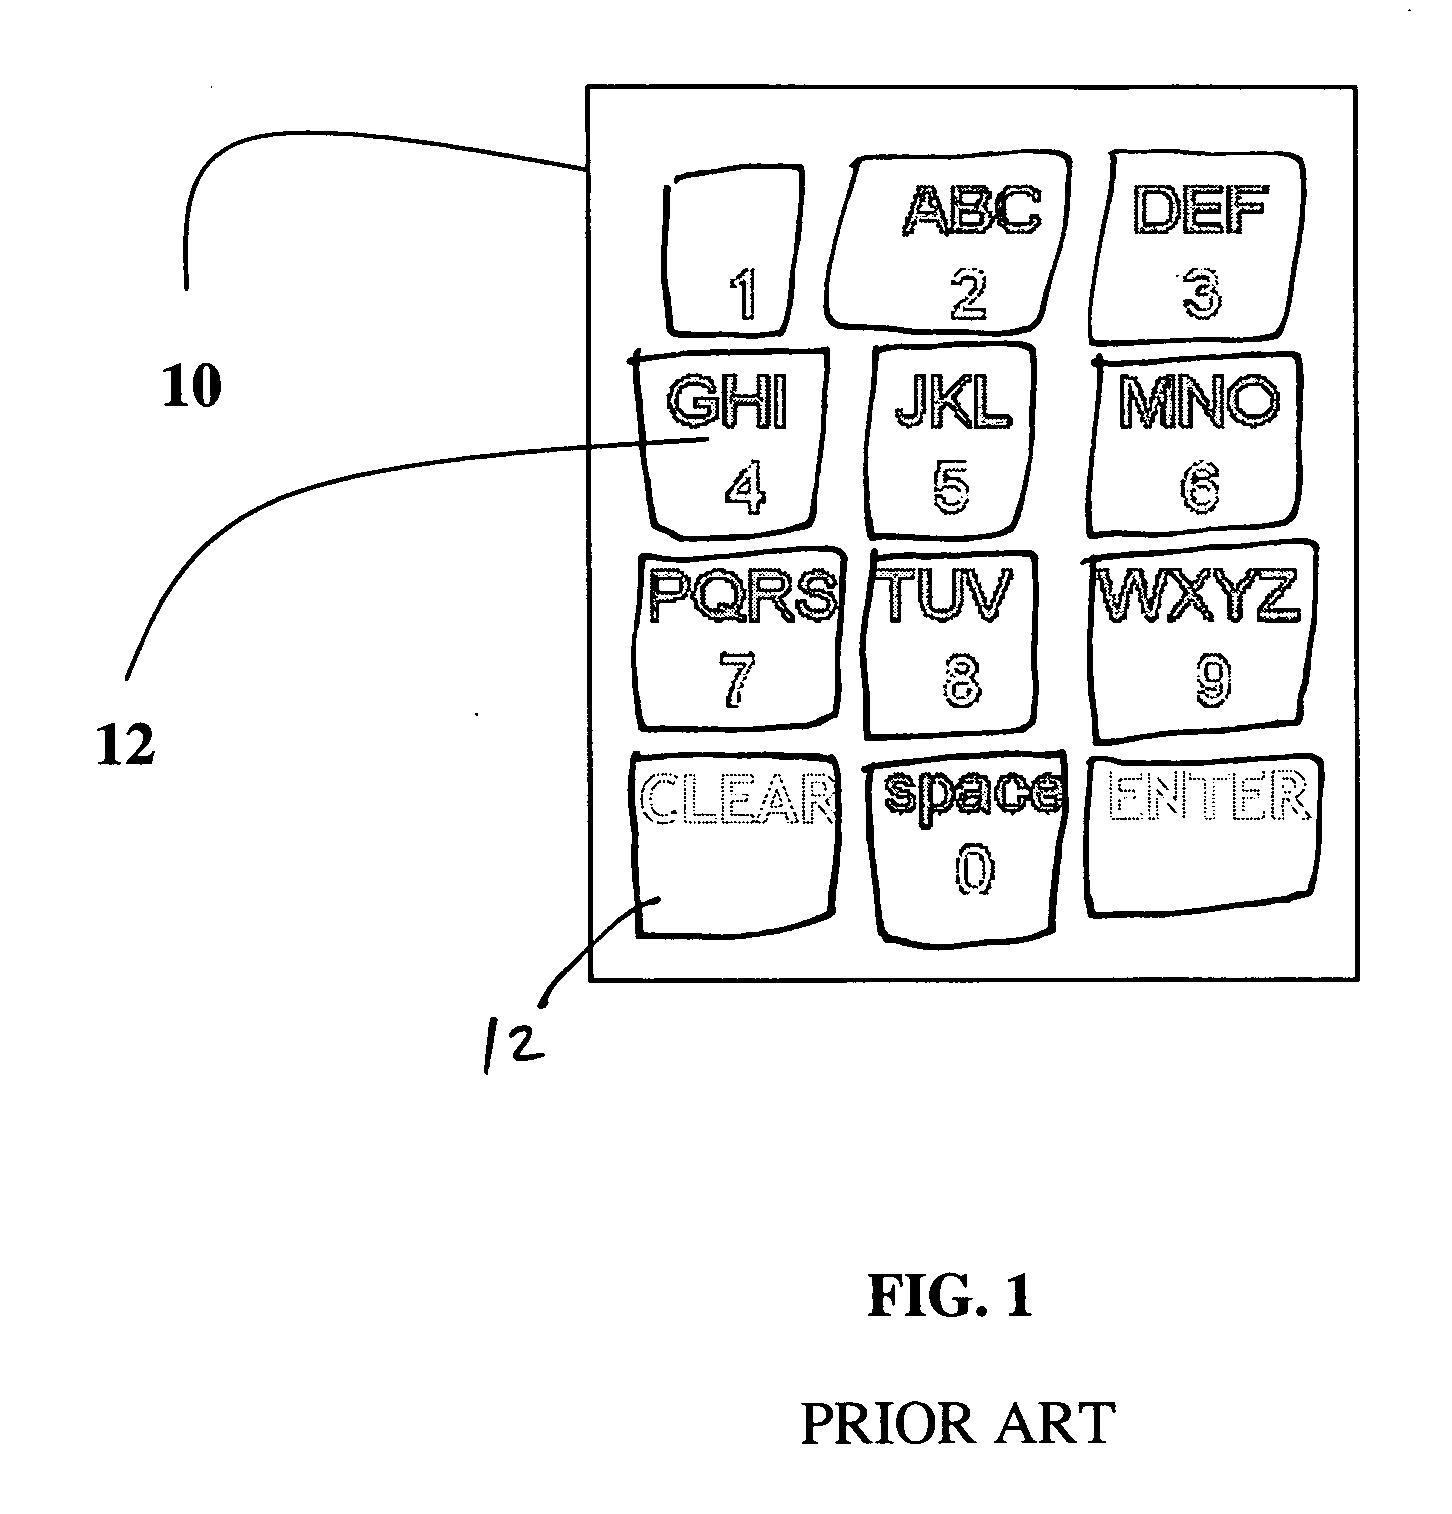 Method and system for offsetting network latencies during incremental searching using local caching and predictive fetching of results from a remote server